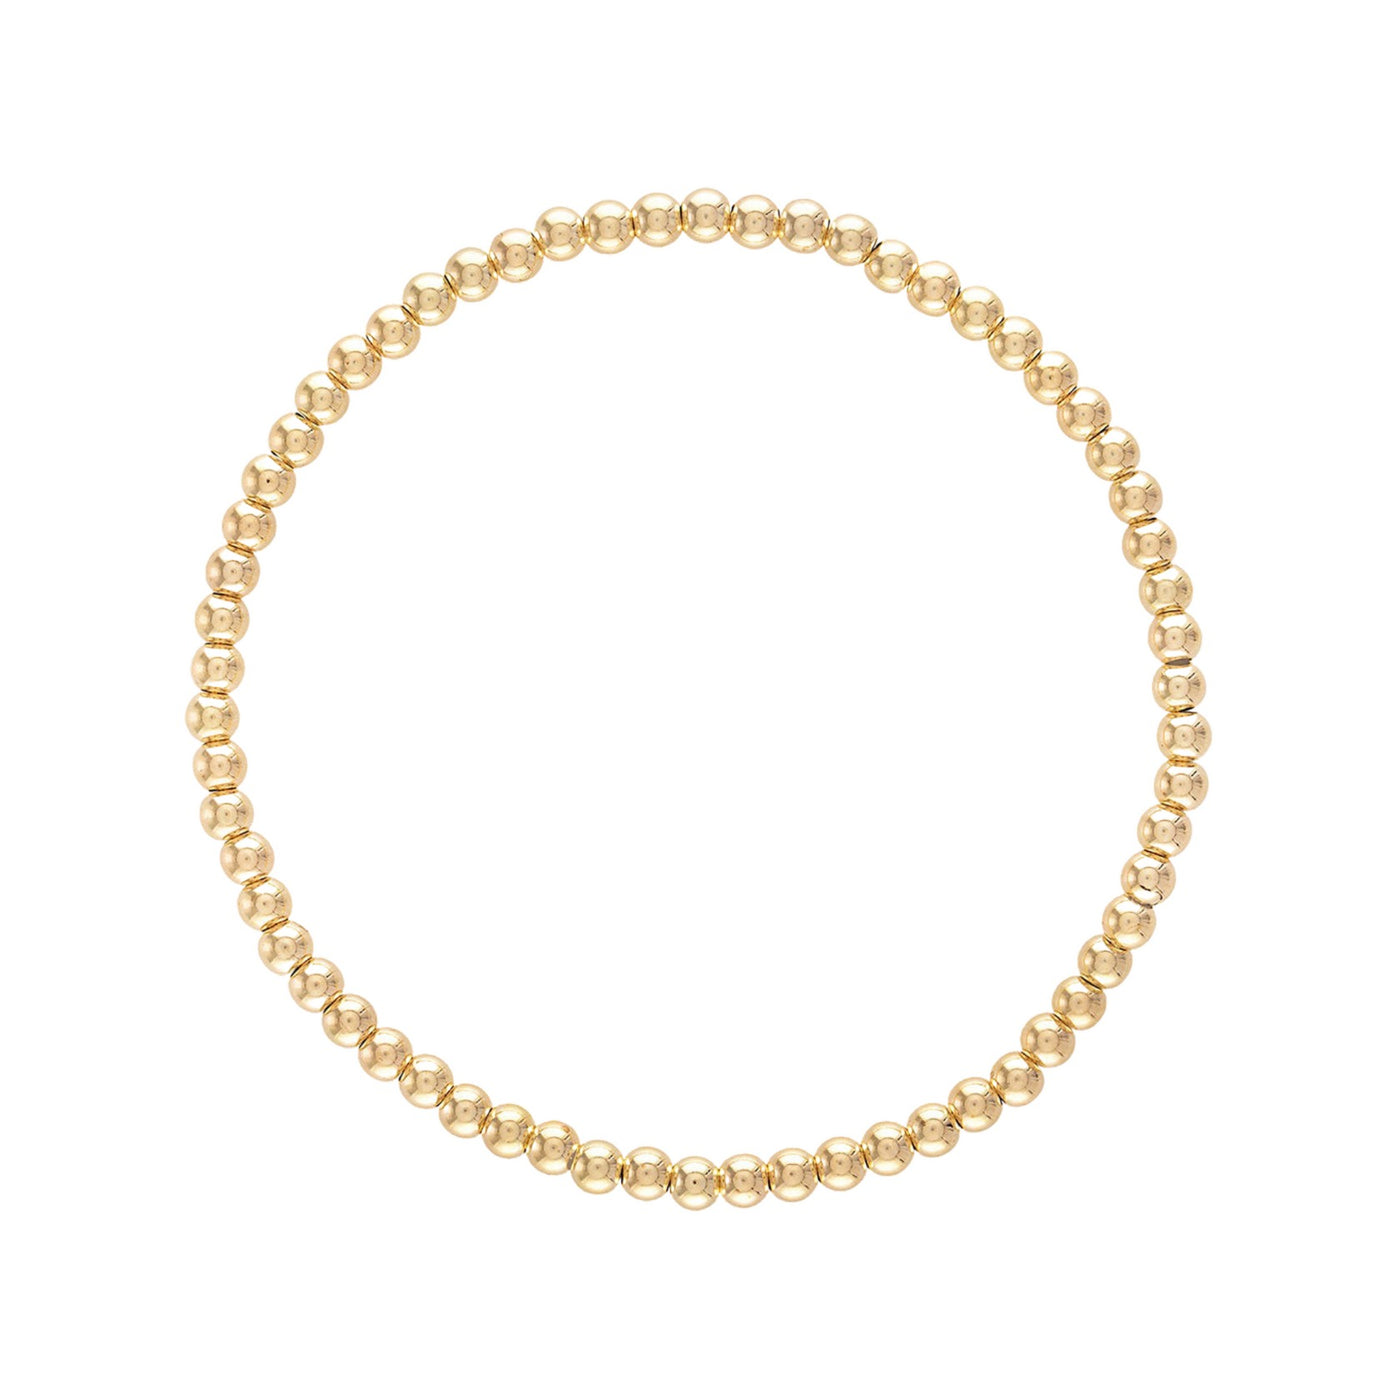 3mm Stainless Steel Ball Stretch Bracelet in Gold